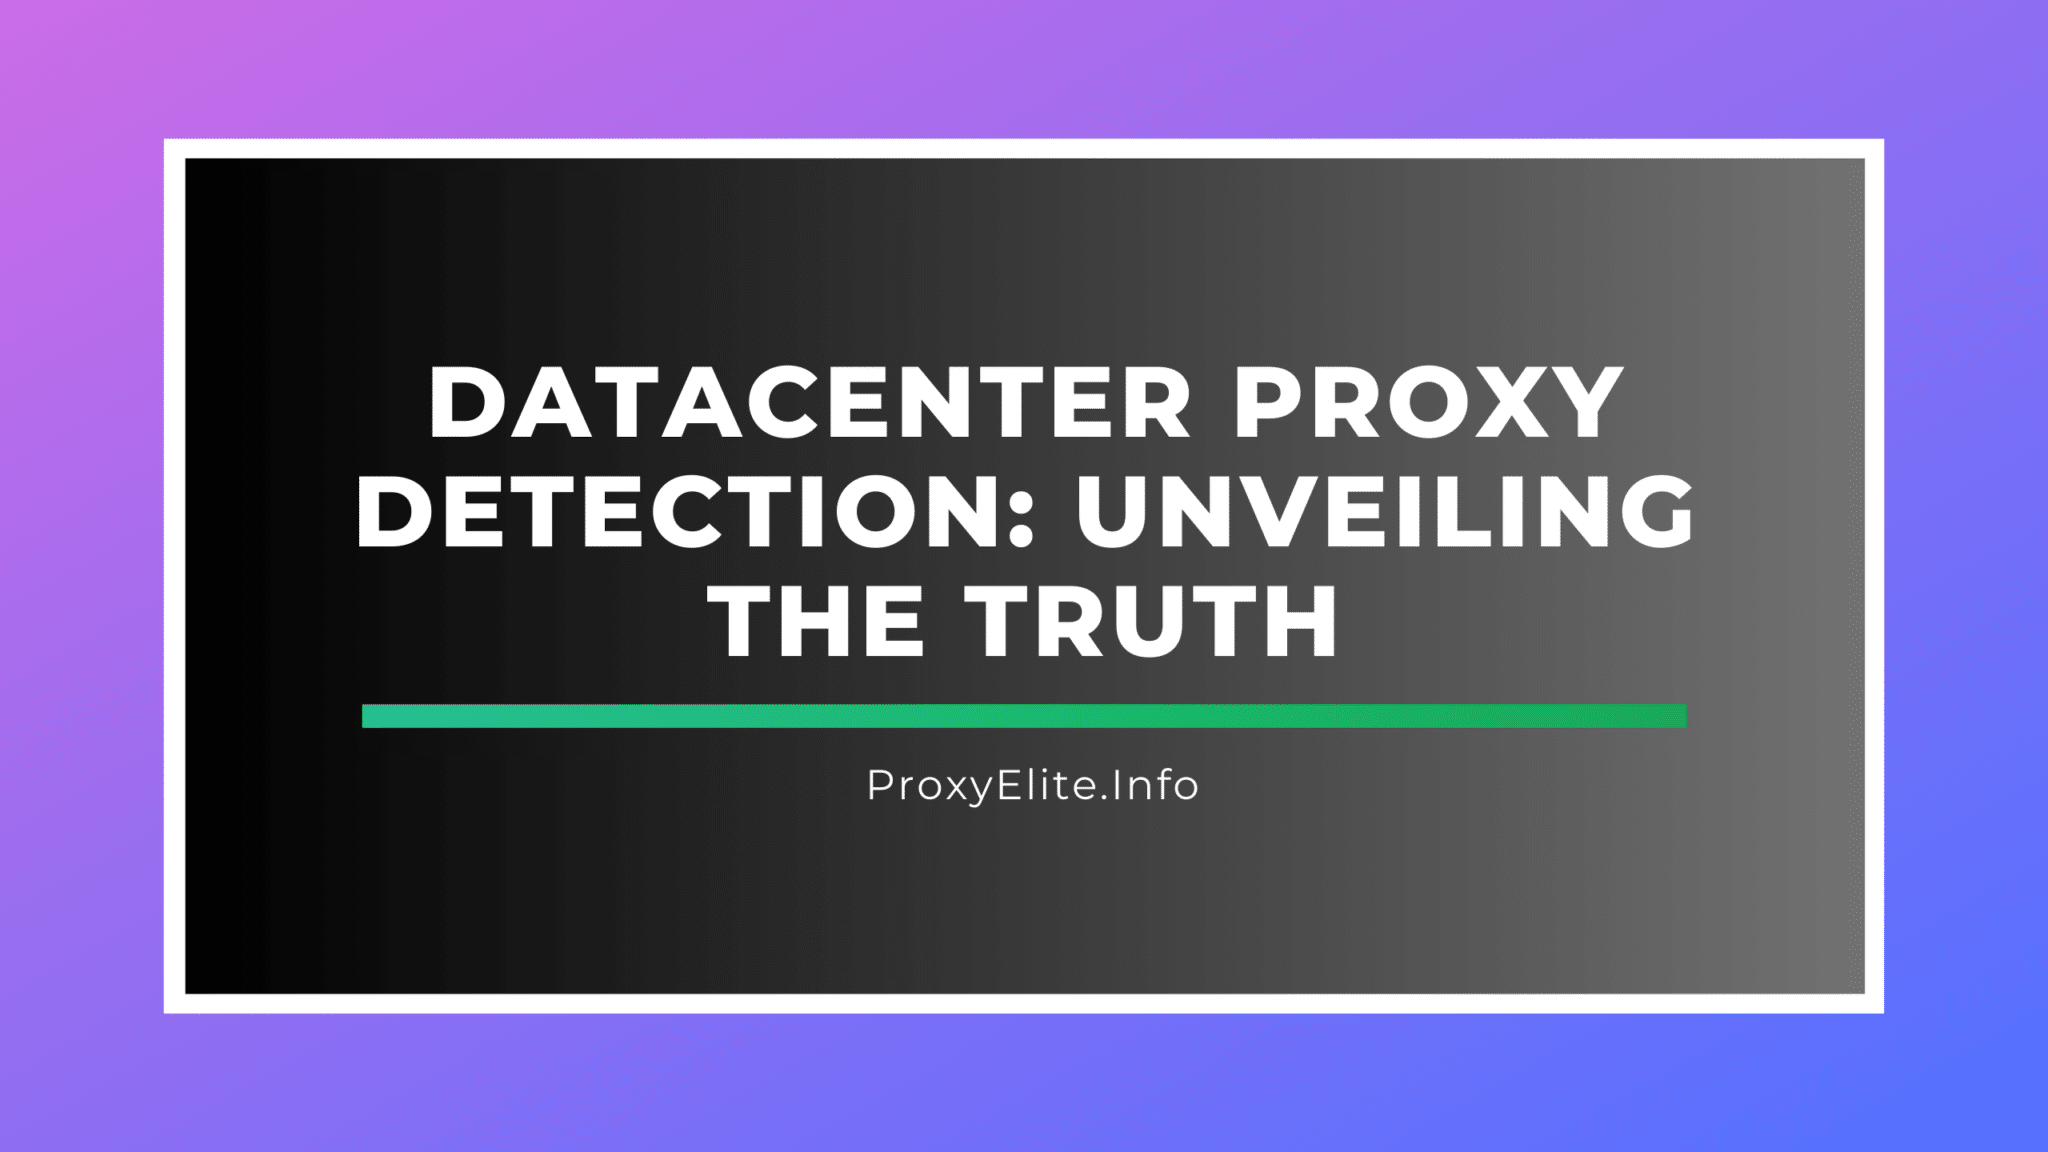 Datacenter Proxy Detection: Unveiling the Truth